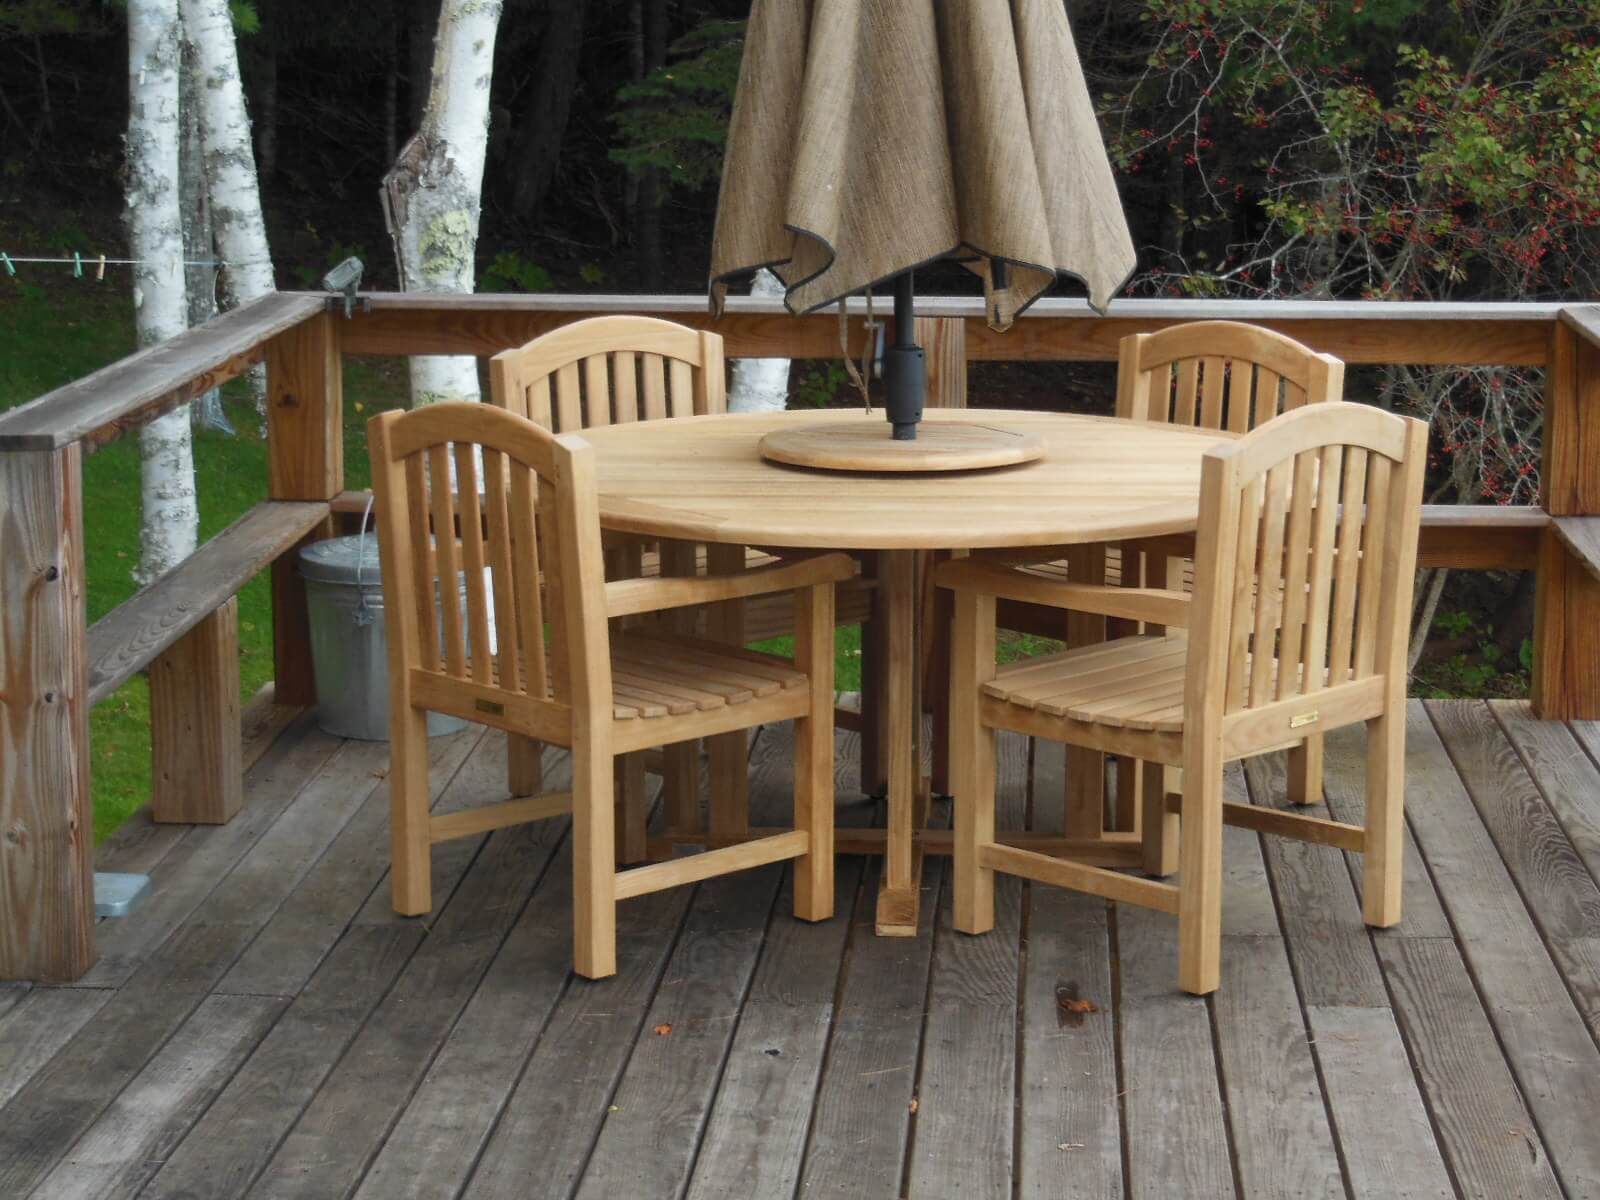 Why Is Teak Furniture More Expensive